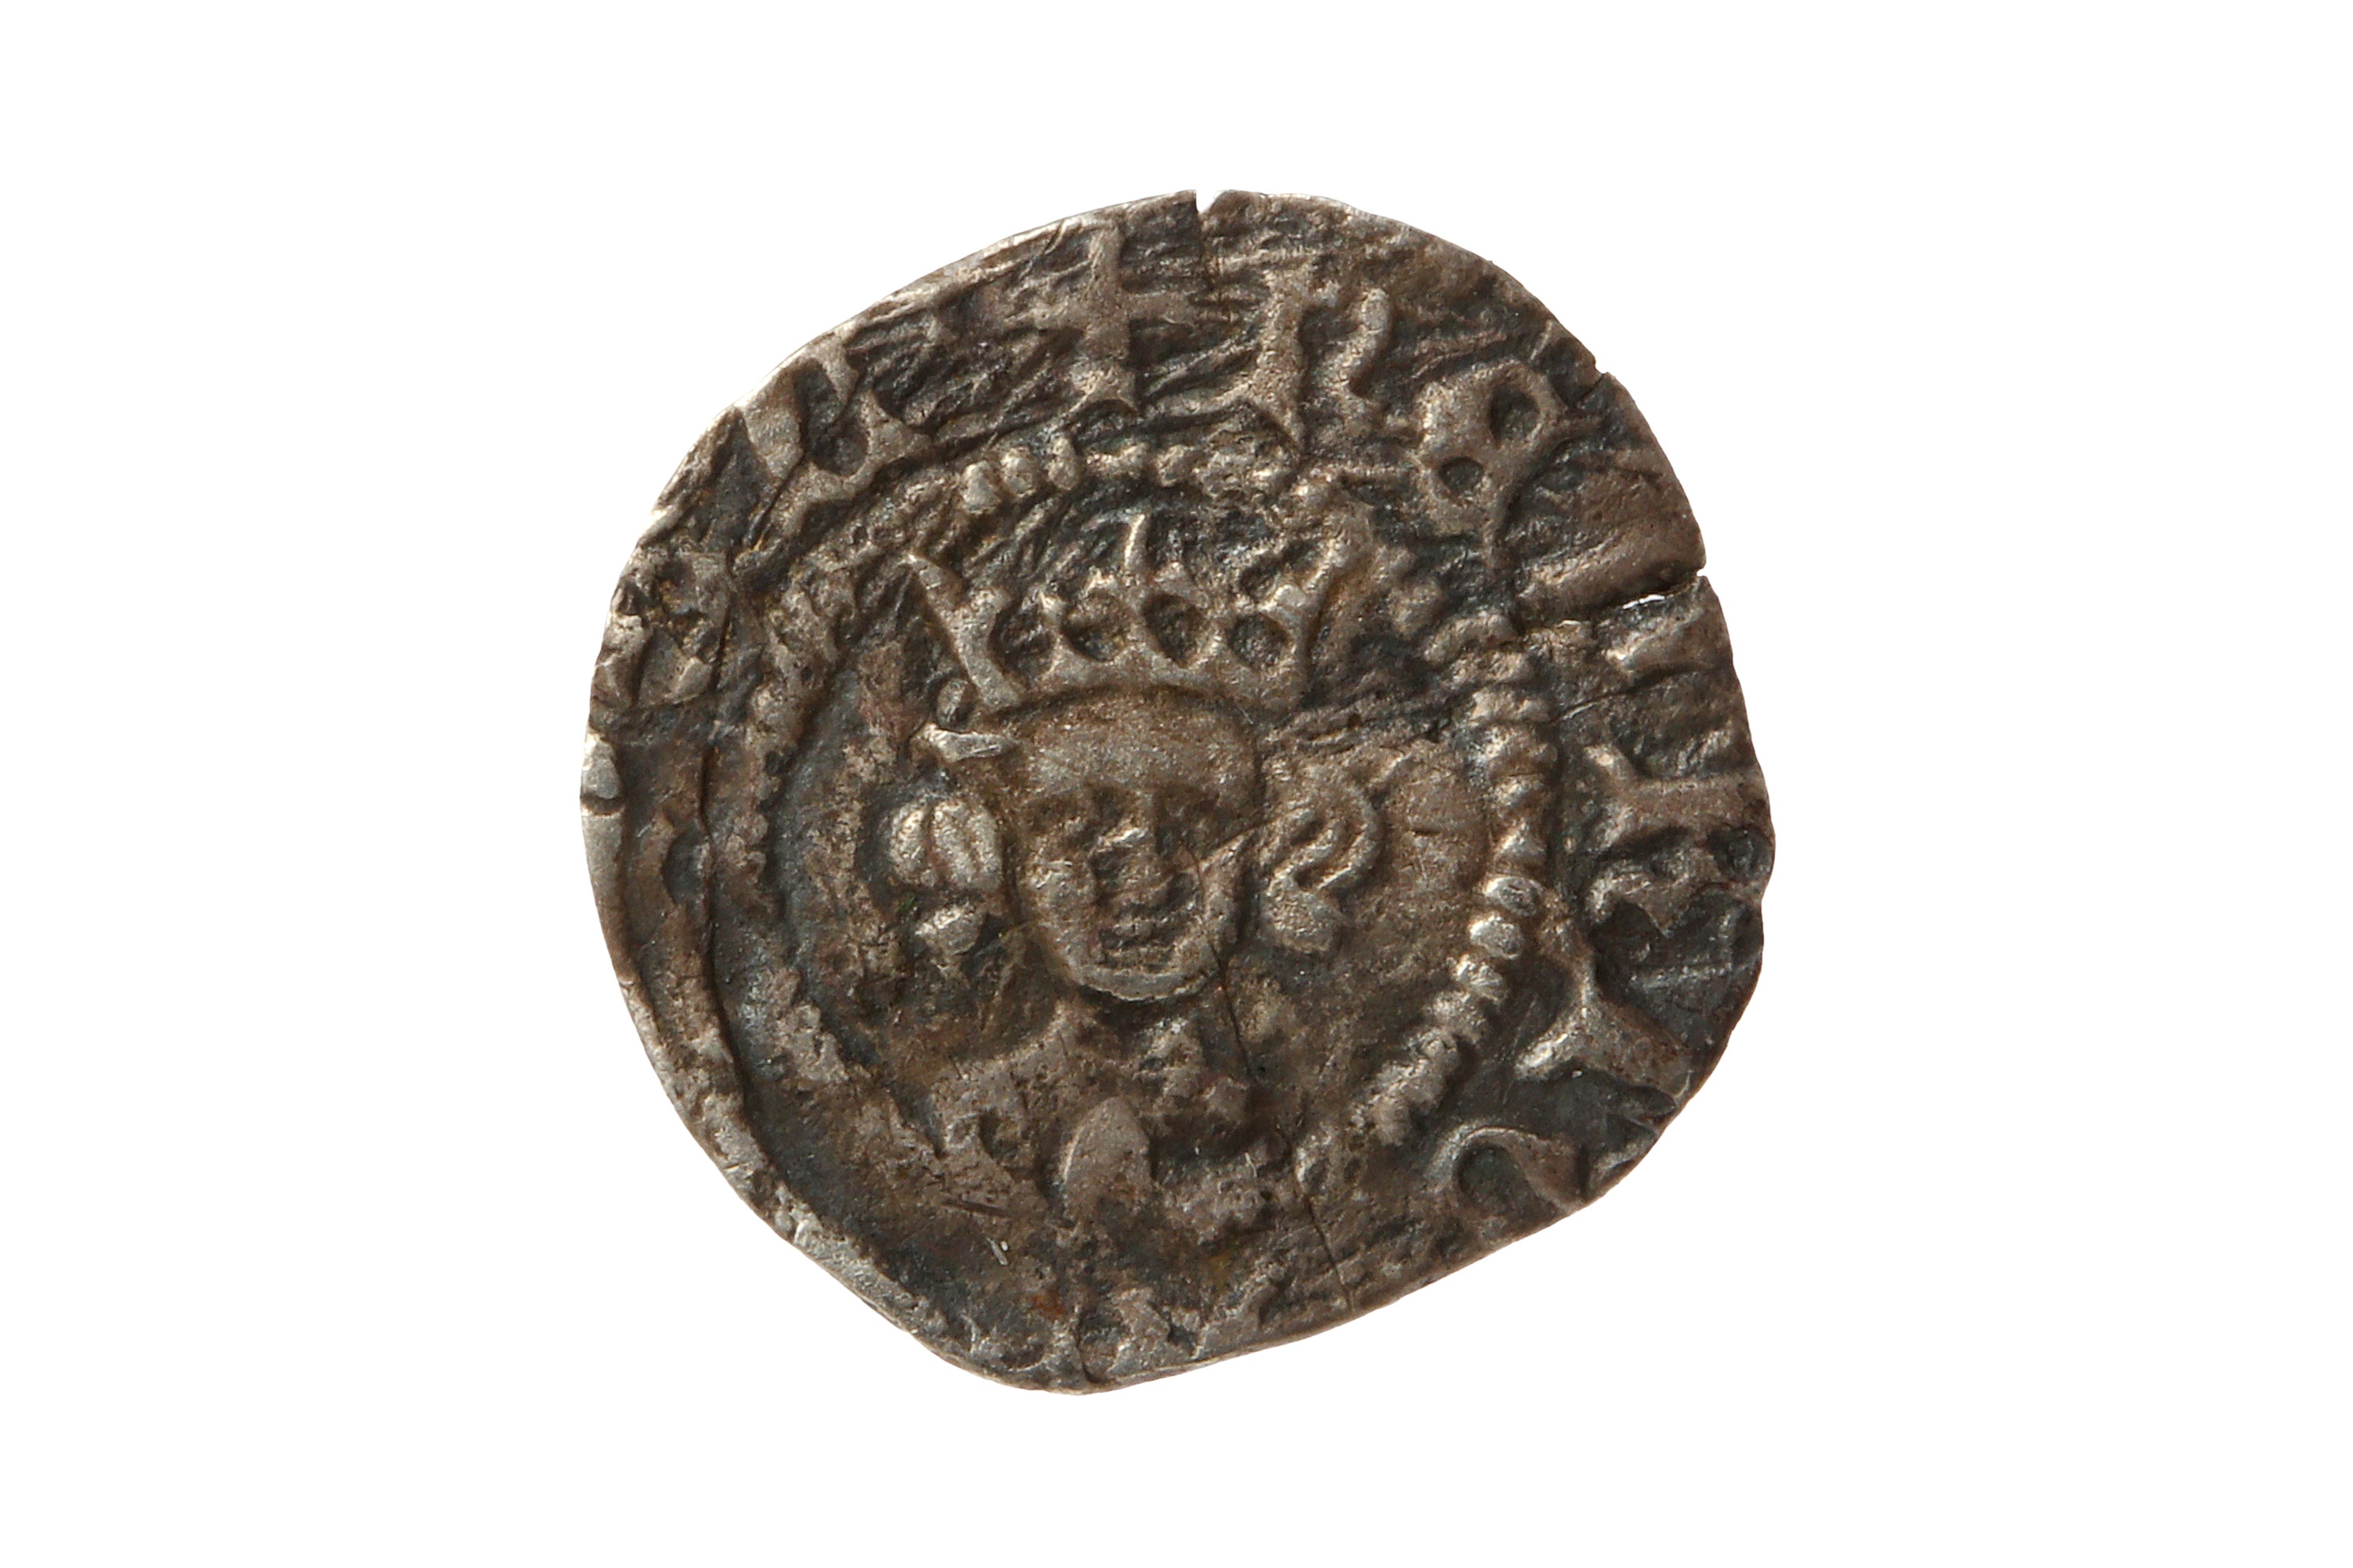 HENRY VI (FIRST REIGN, 1422 - 1461) LEAF TREFOIL ISSUE, LONDON MINT HALFPENNY.